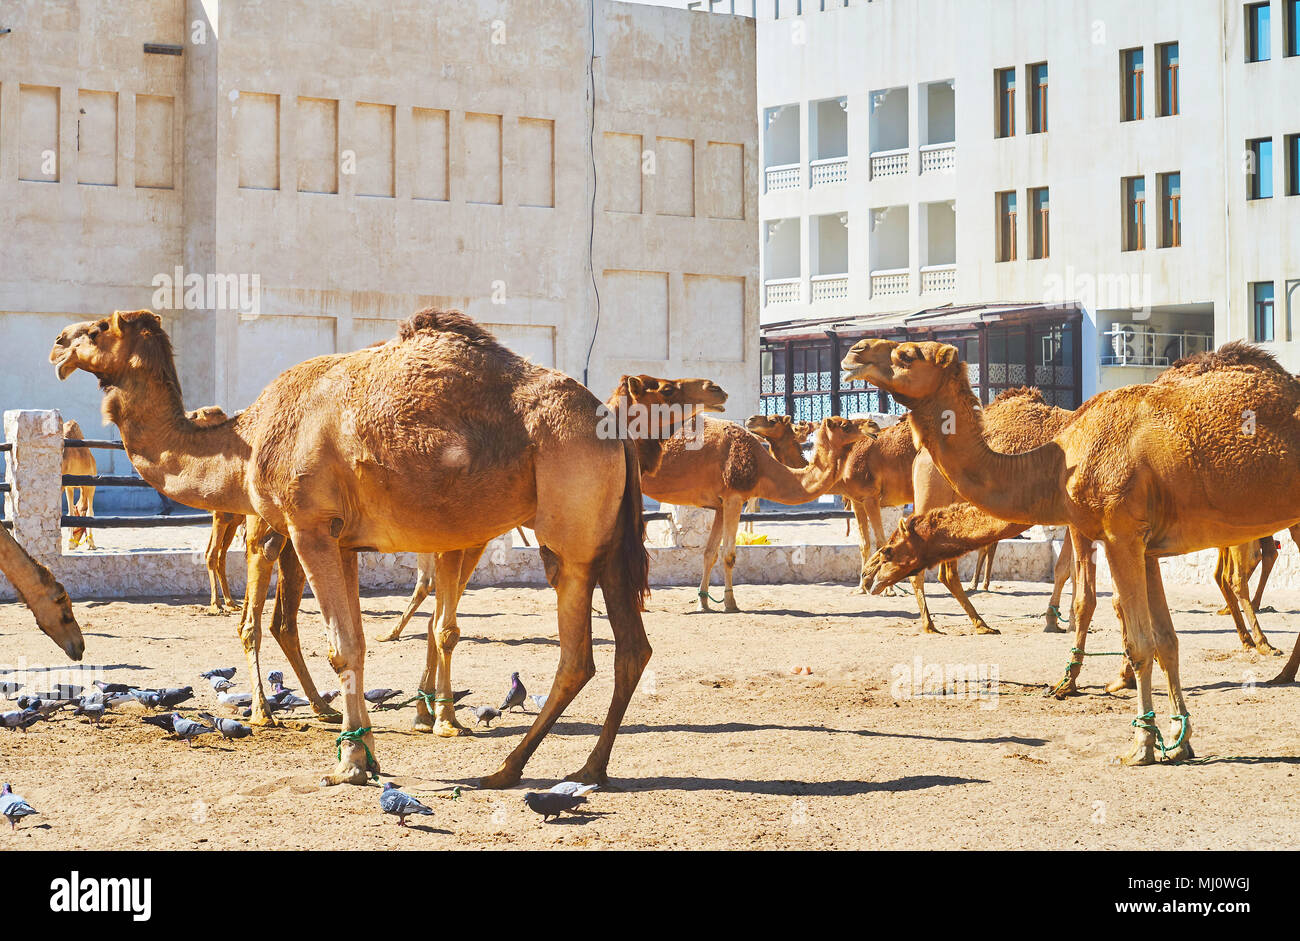 The Camel Pen in downtown of Doha is located next to the Souq Wakif - the old market, popular among tourists, Al Souq District, Qatar. Stock Photo